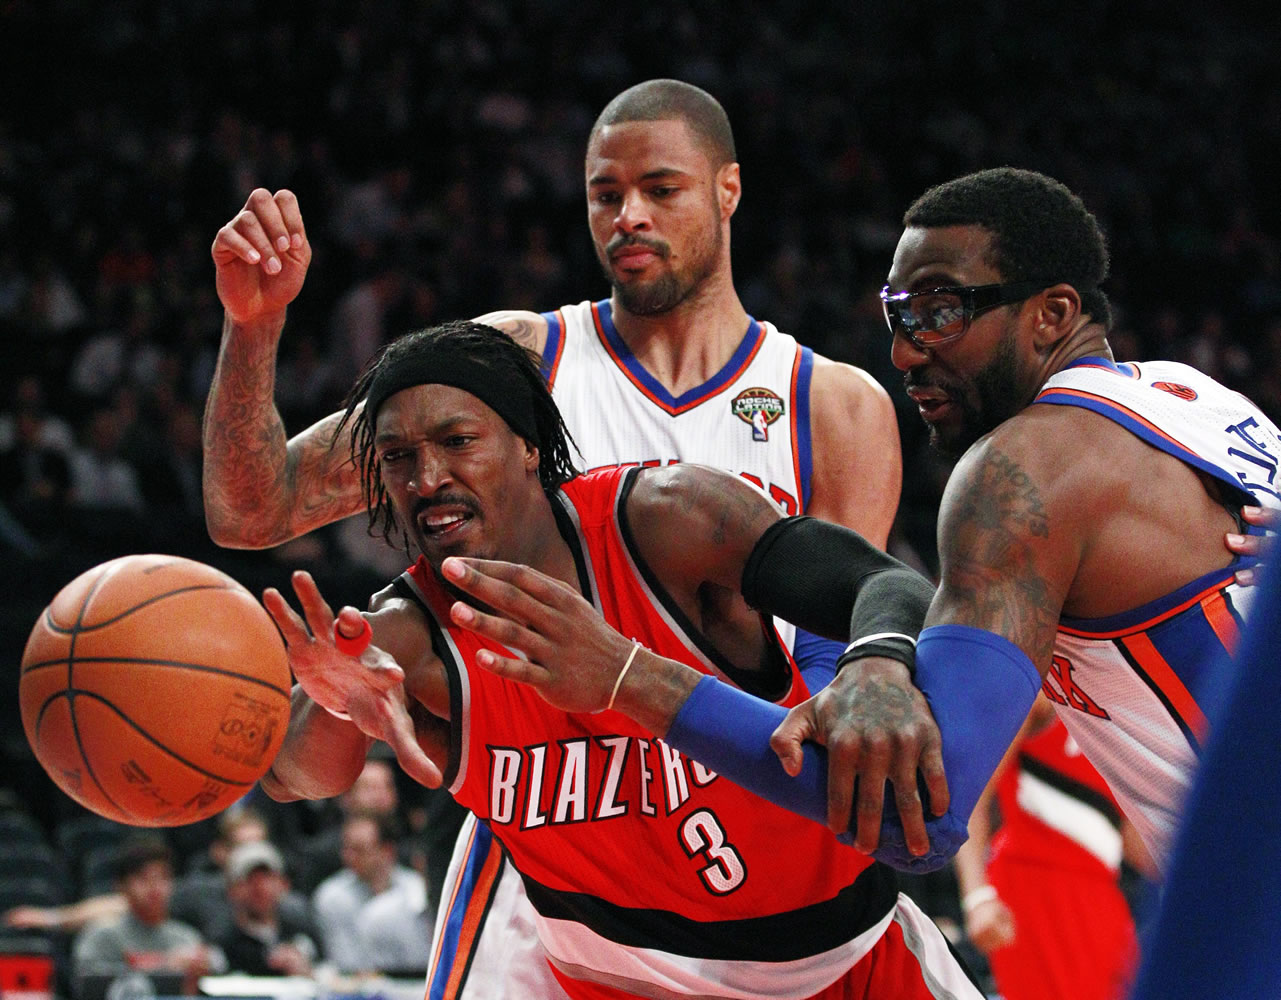 Portland Trail Blazers' Gerald Wallace (3) is defended by New York Knicks' Amare Stoudemire, right, and Tyson Chandler, above, during the second half of an NBA basketball game Wednesday, March 14, 2012, in New York.